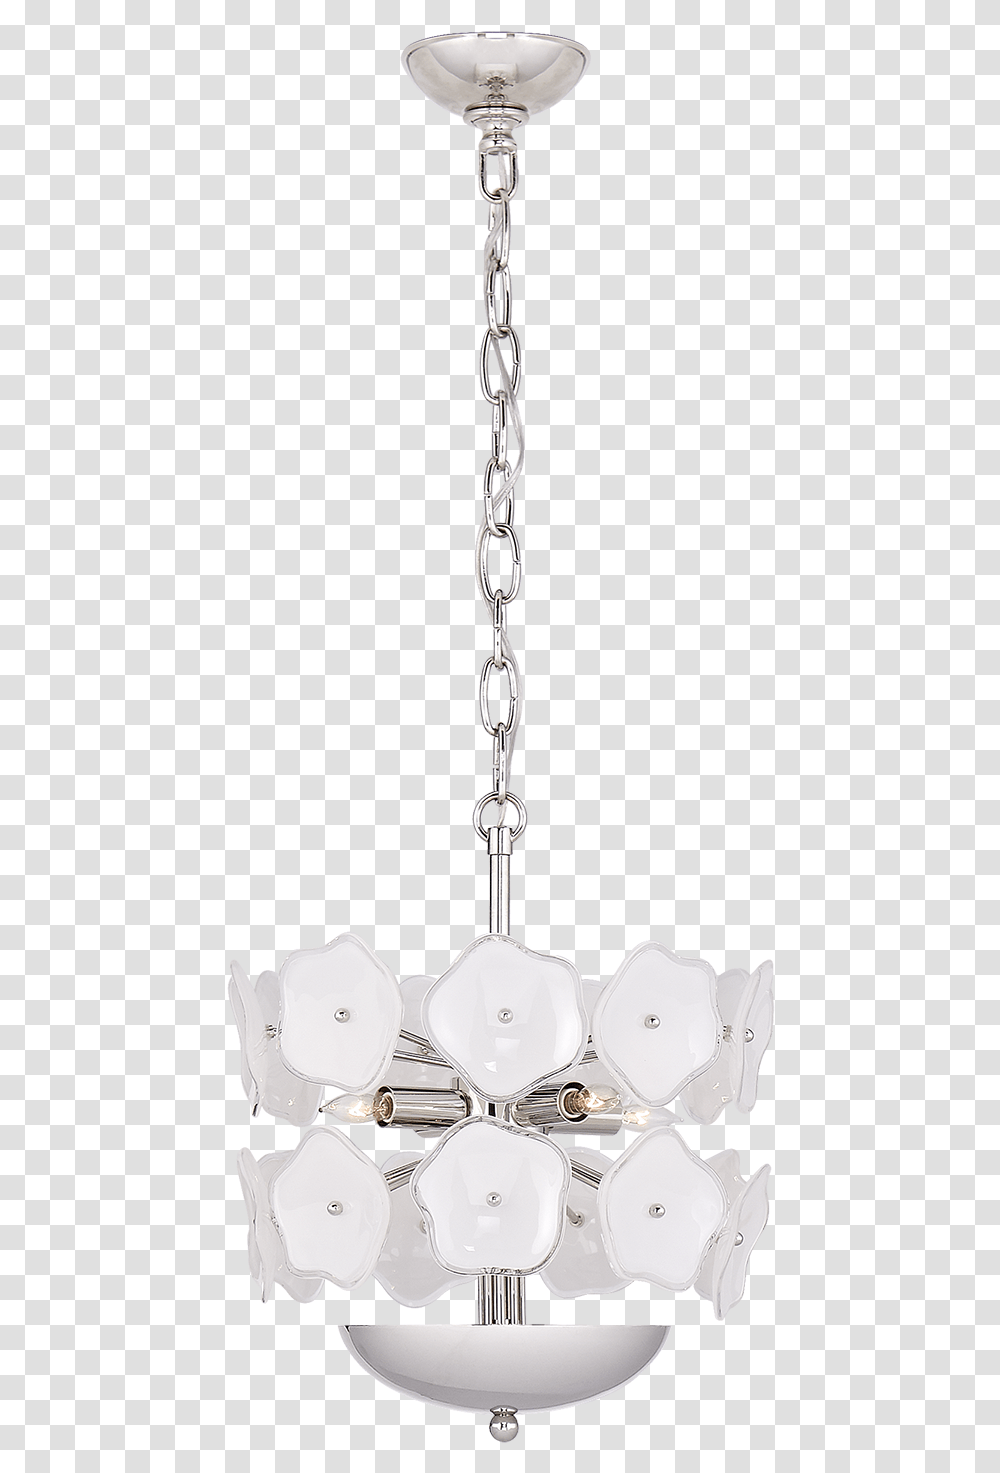 Kate Spade New York Leighton Small Chandelier Ks 5065pn Cre, Lamp, Crystal Transparent Png